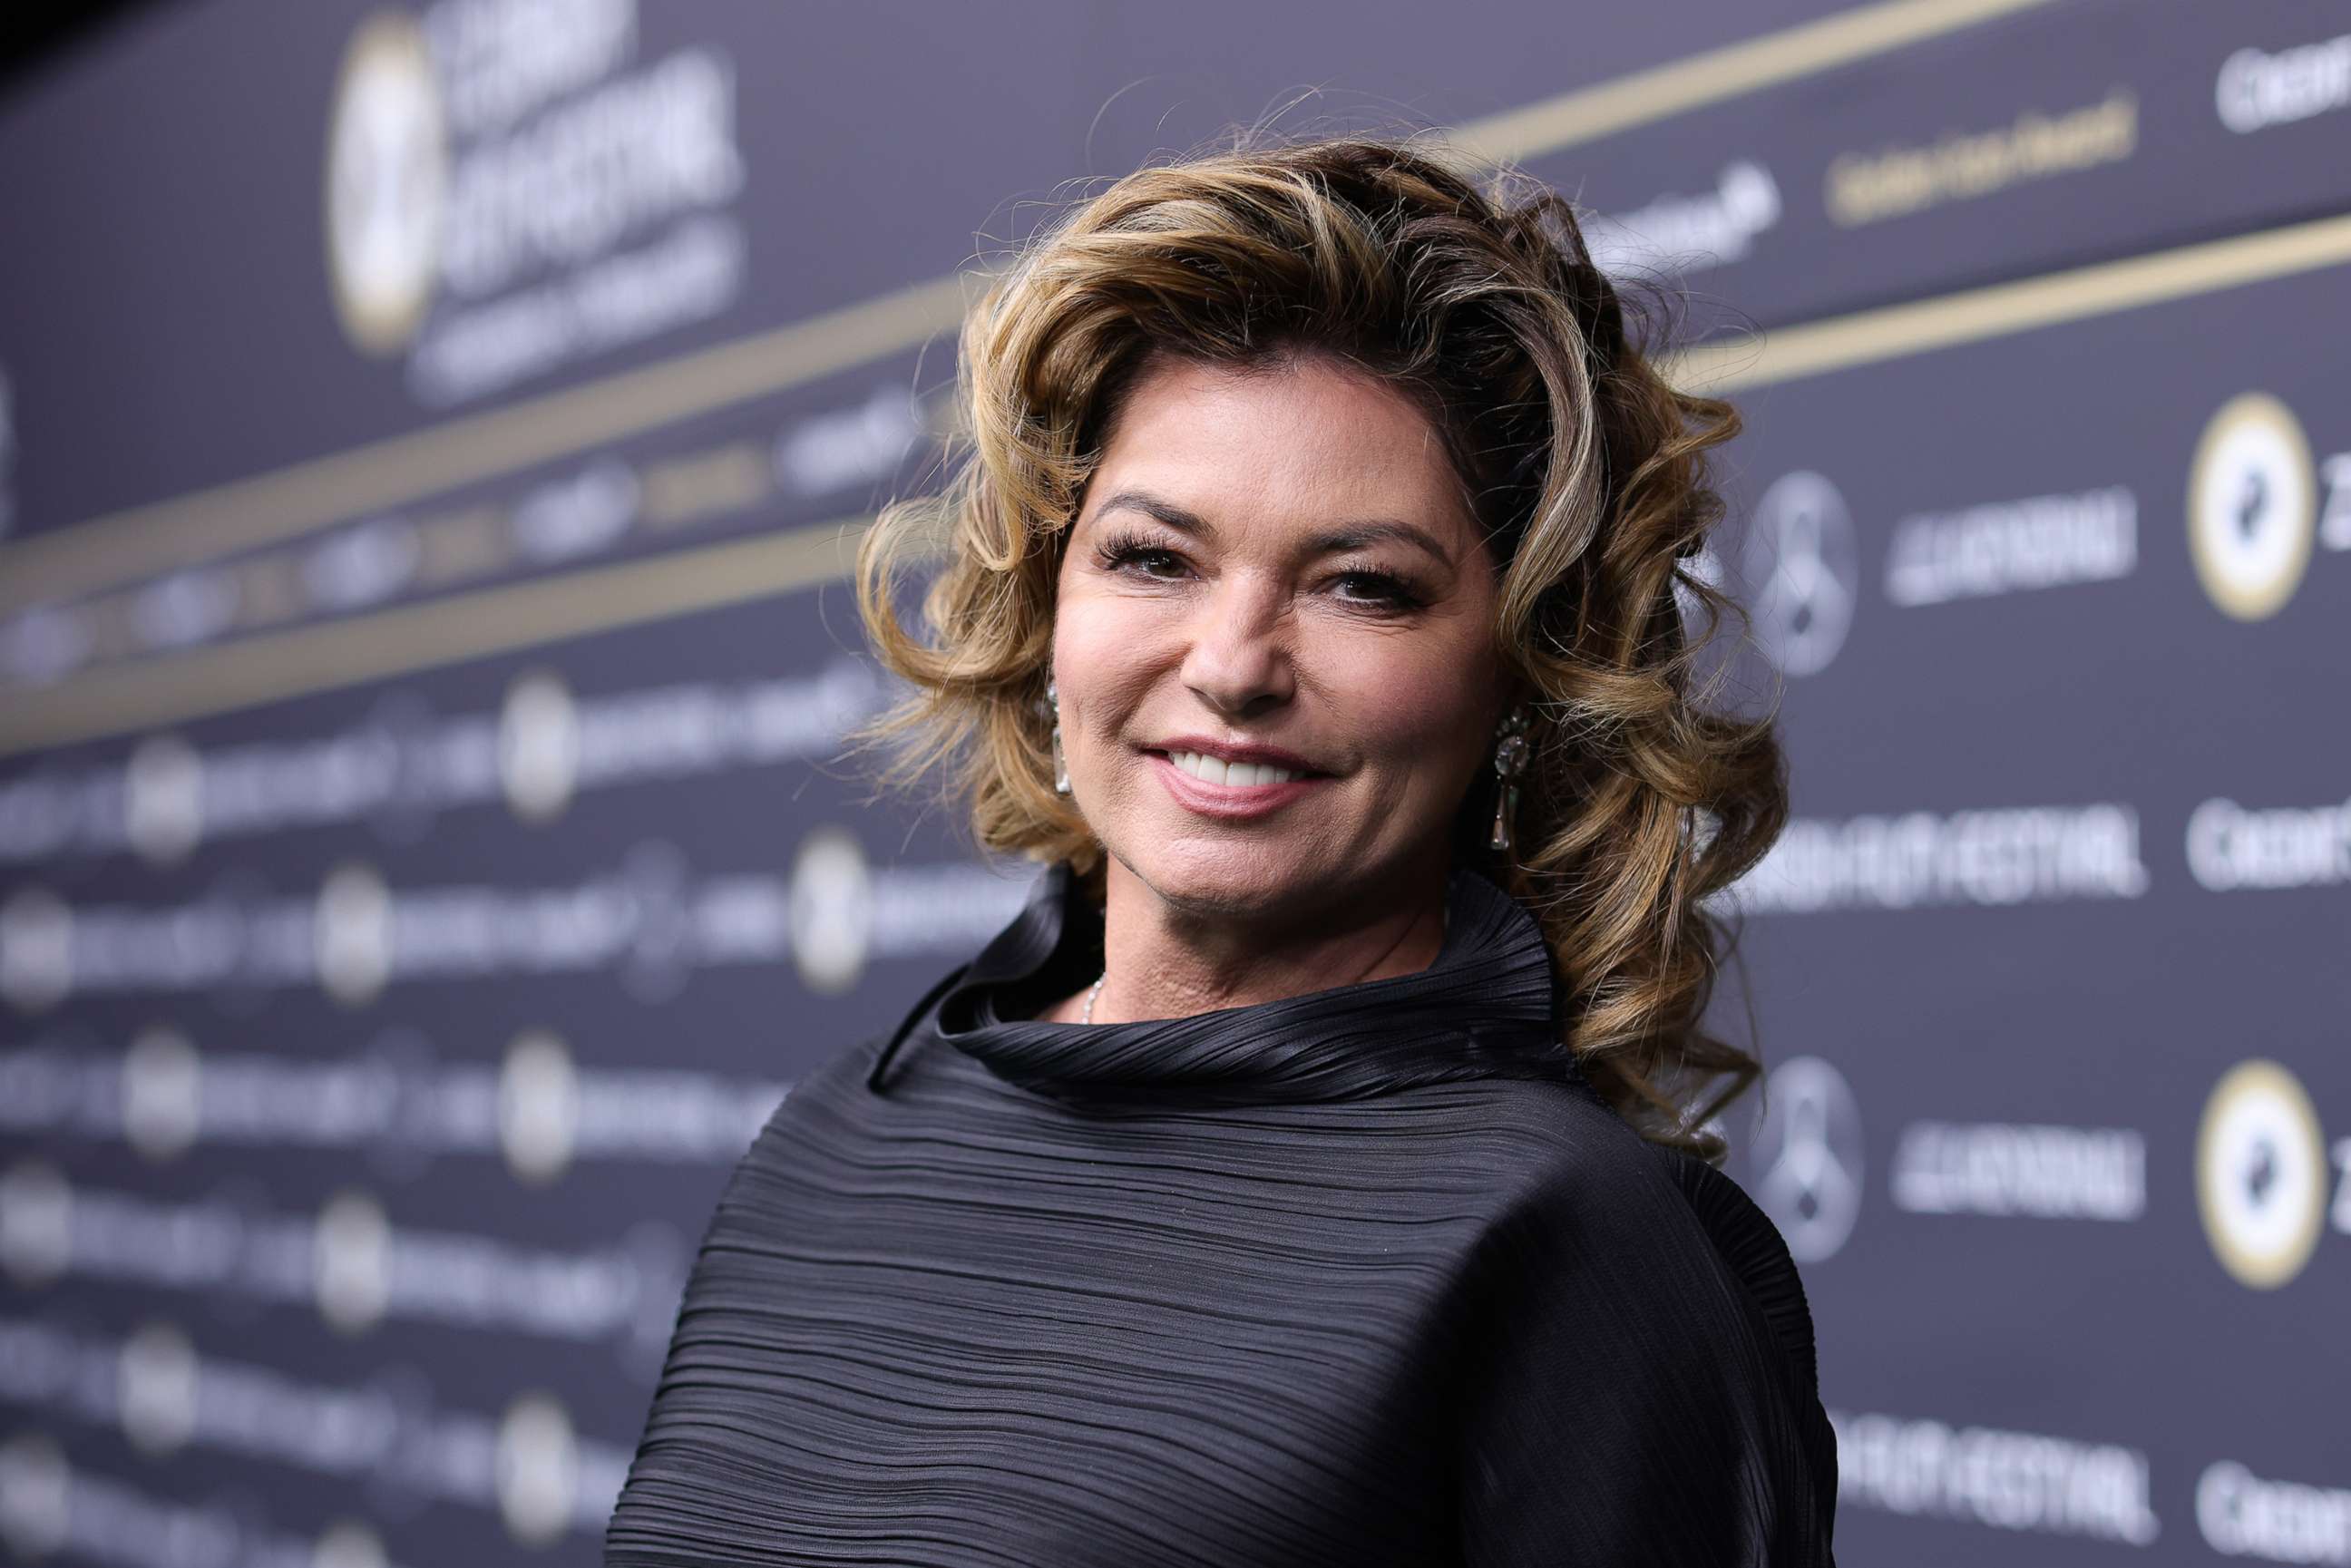 PHOTO: Shania Twain arrives for the ZFF Golden Icon Award ceremony and "Casino" screening during the 17th Zurich Film Festival at Kino Corso on Sept. 25, 2021 in Zurich, Switzerland.